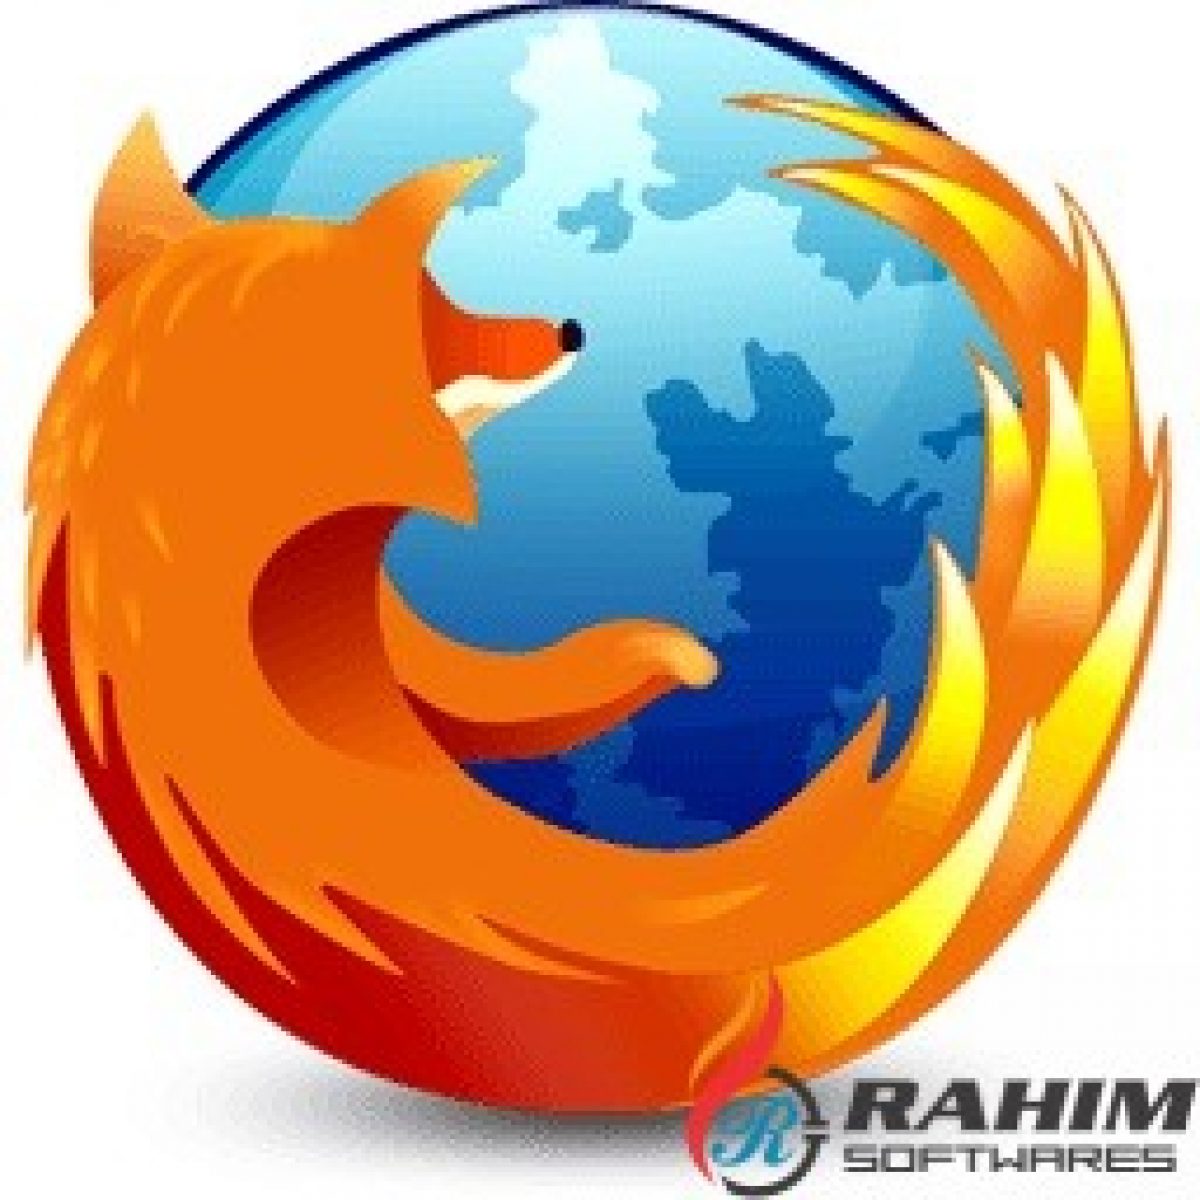 latest mozilla firefox for mac free download